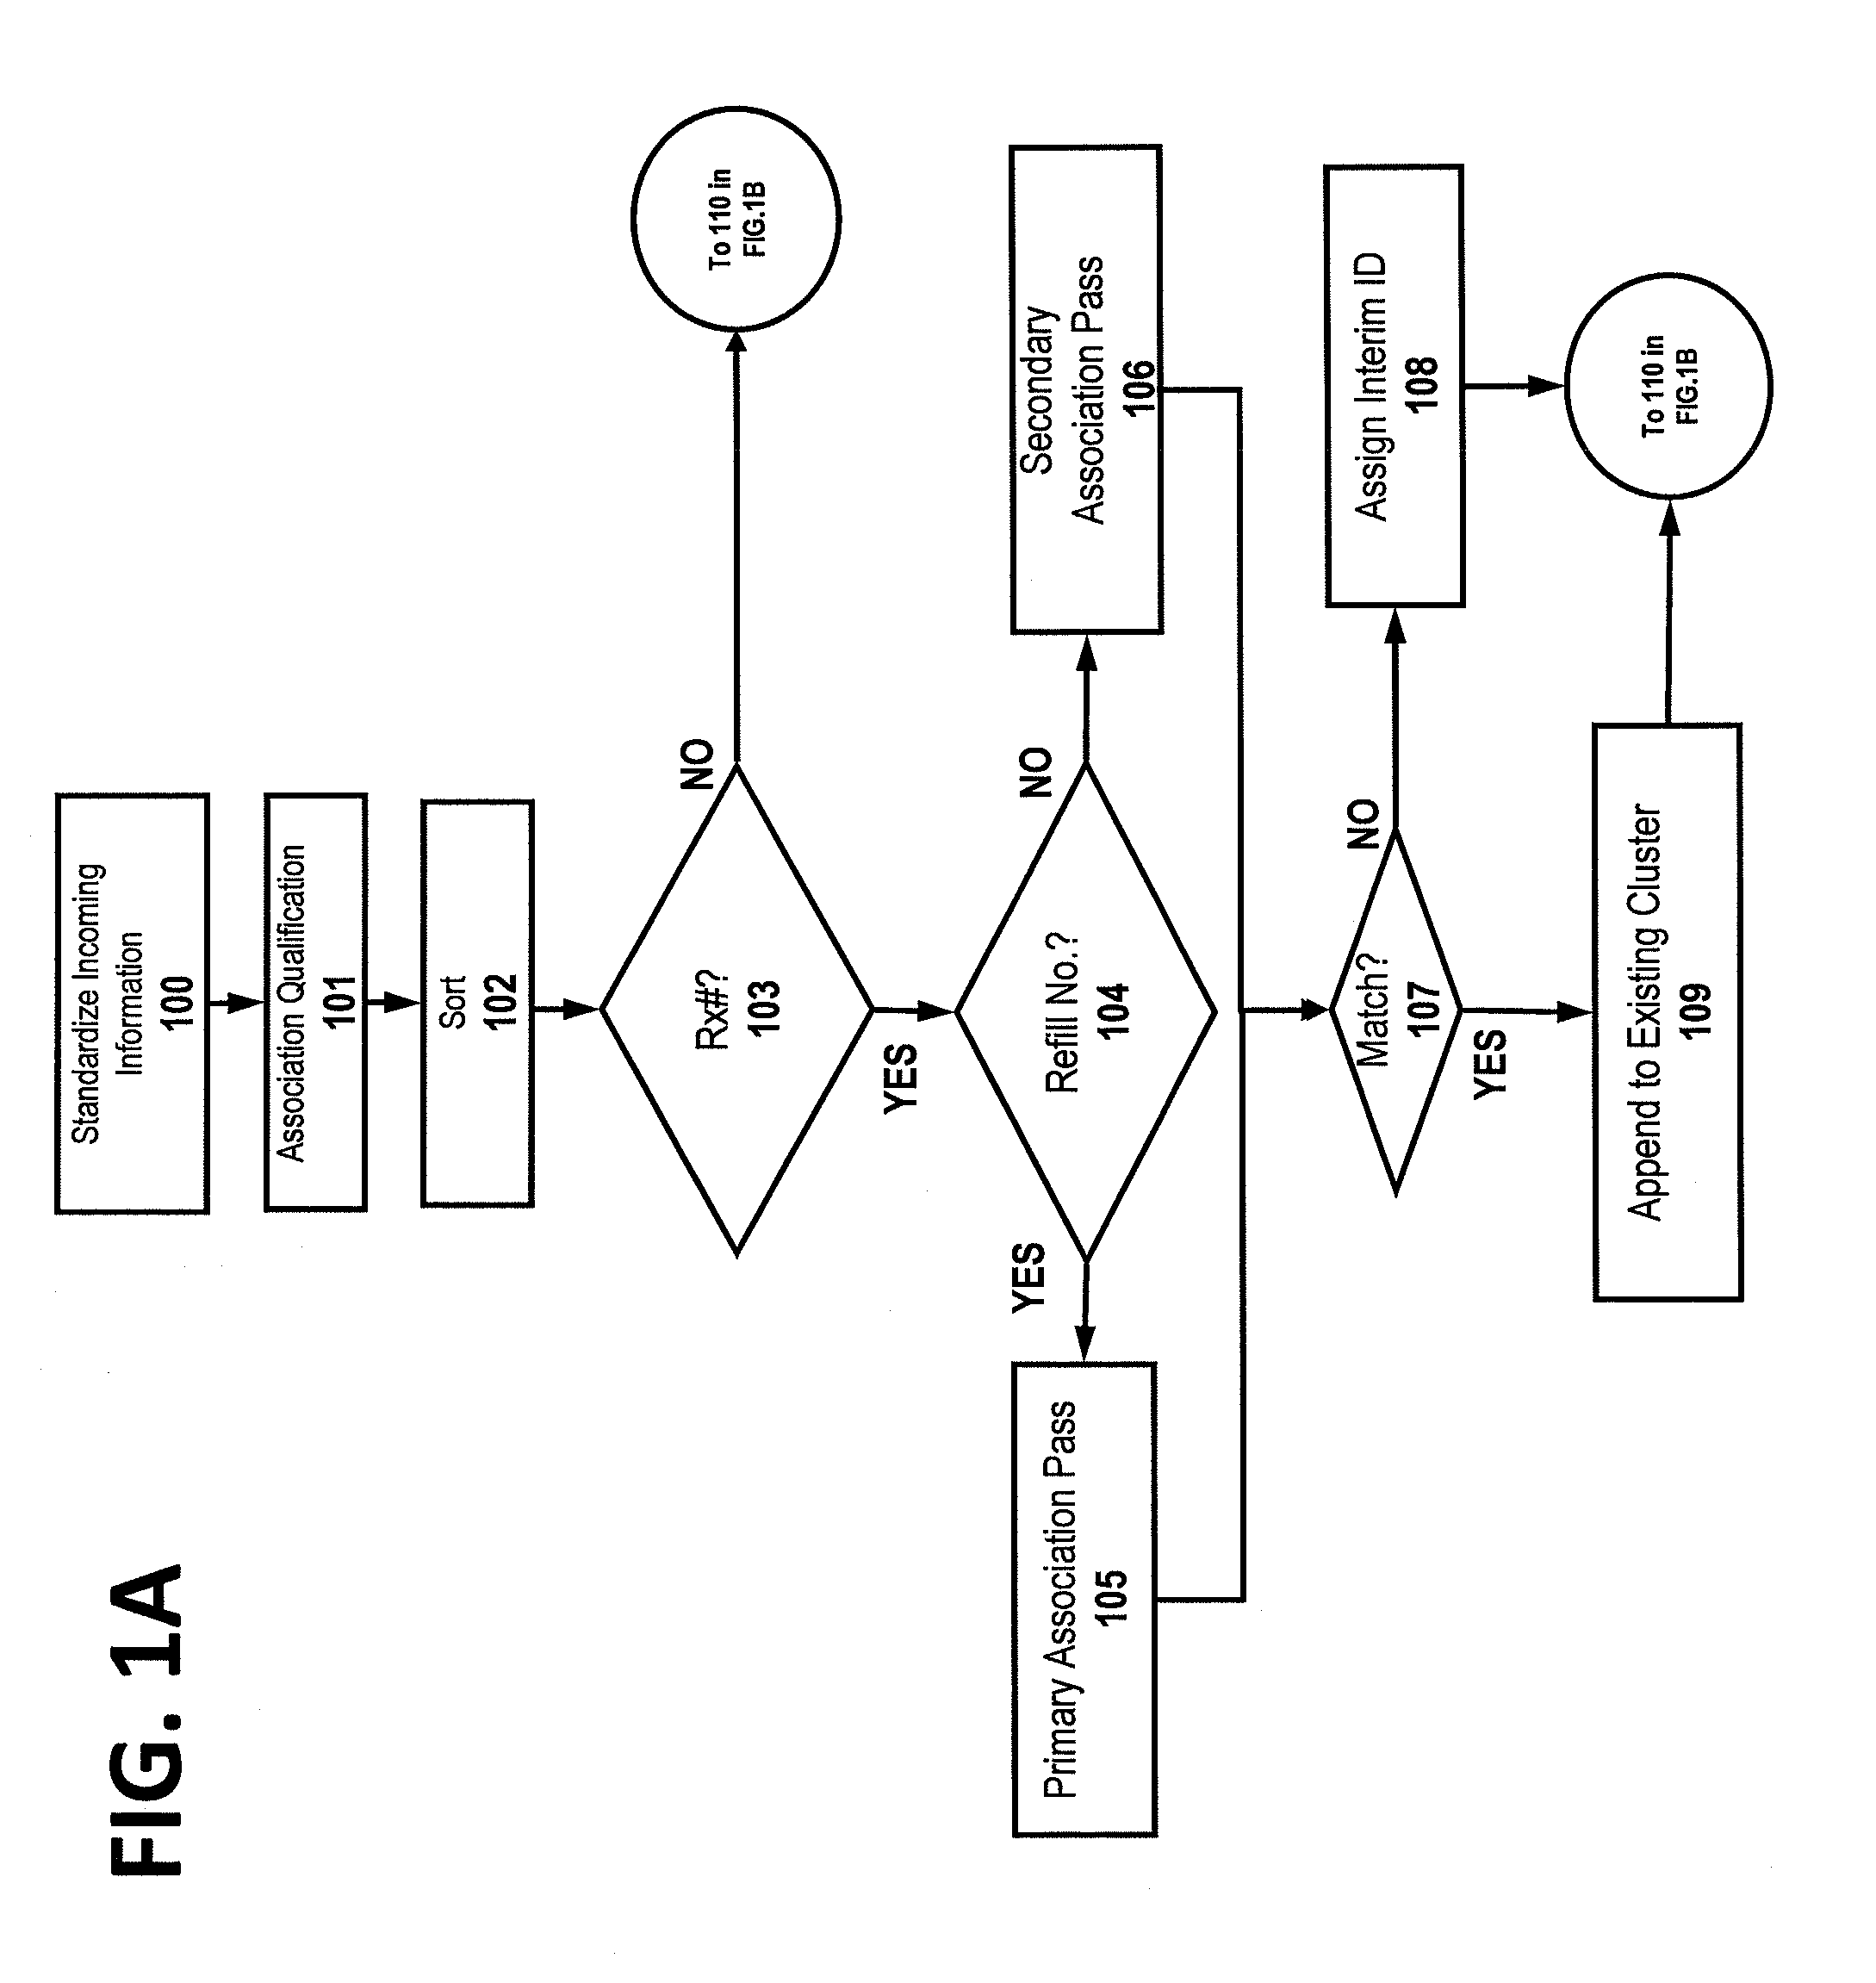 Computer-implemented system and method for associating prescription data and de-duplication